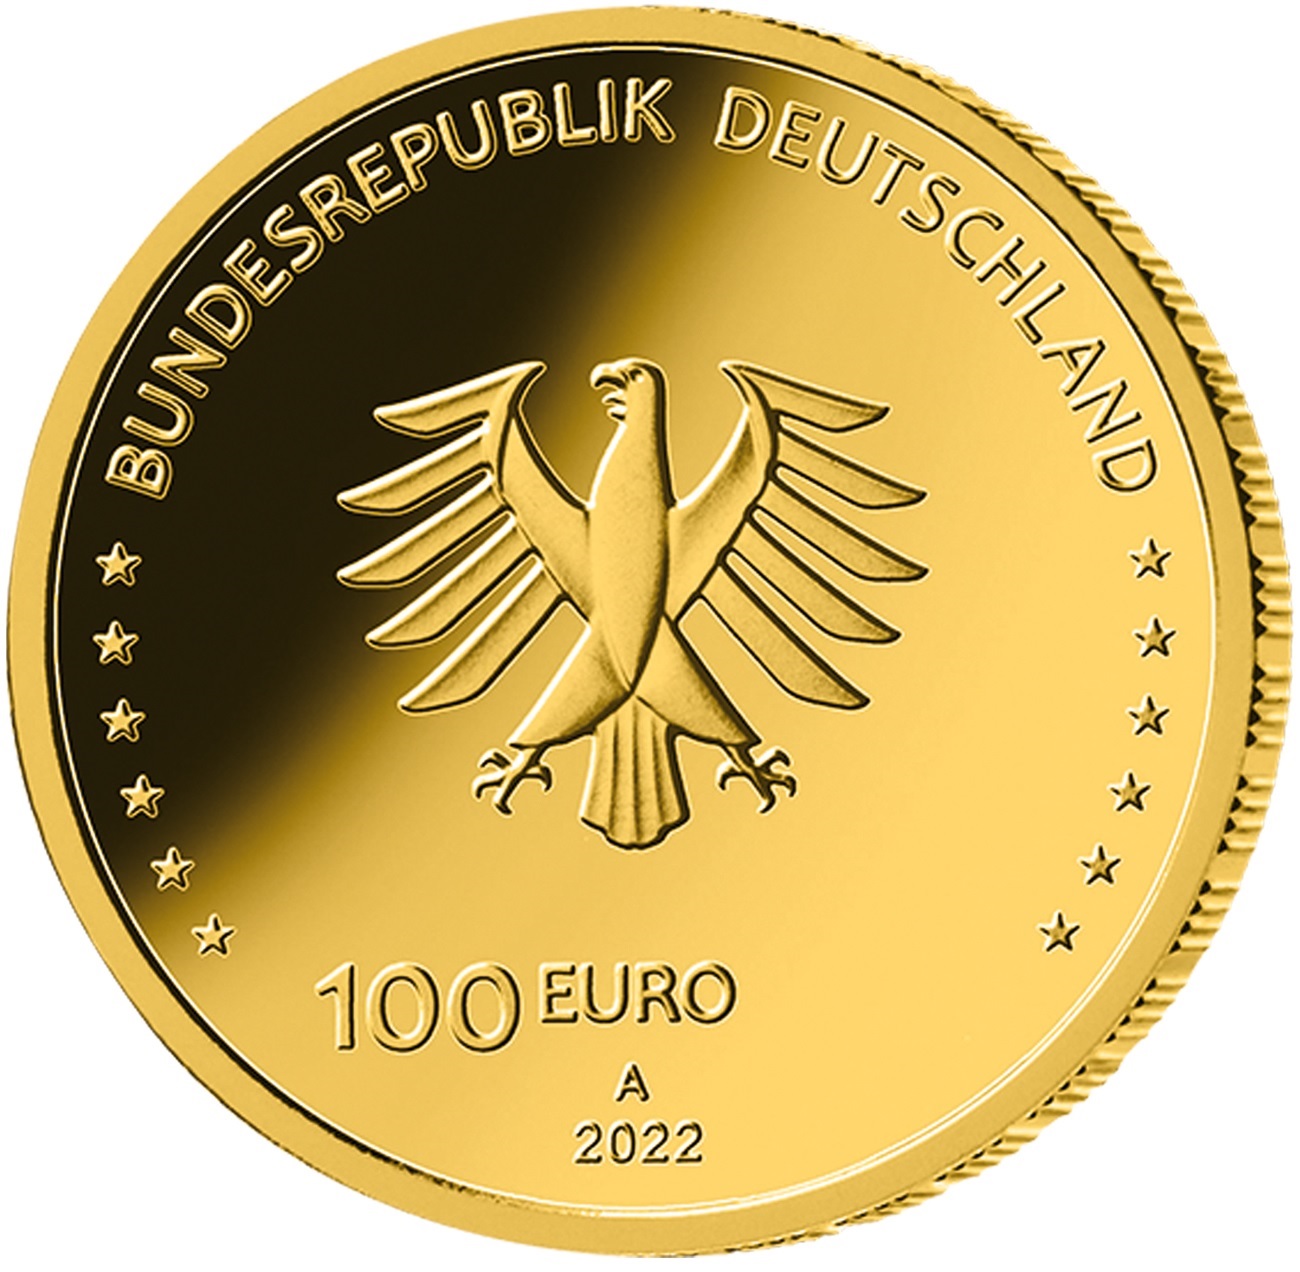 (EUR03.Proof.2022.SGM2201M41S5) 100 euro Germany 2022 A BU gold - Liberty Obverse (zoom)